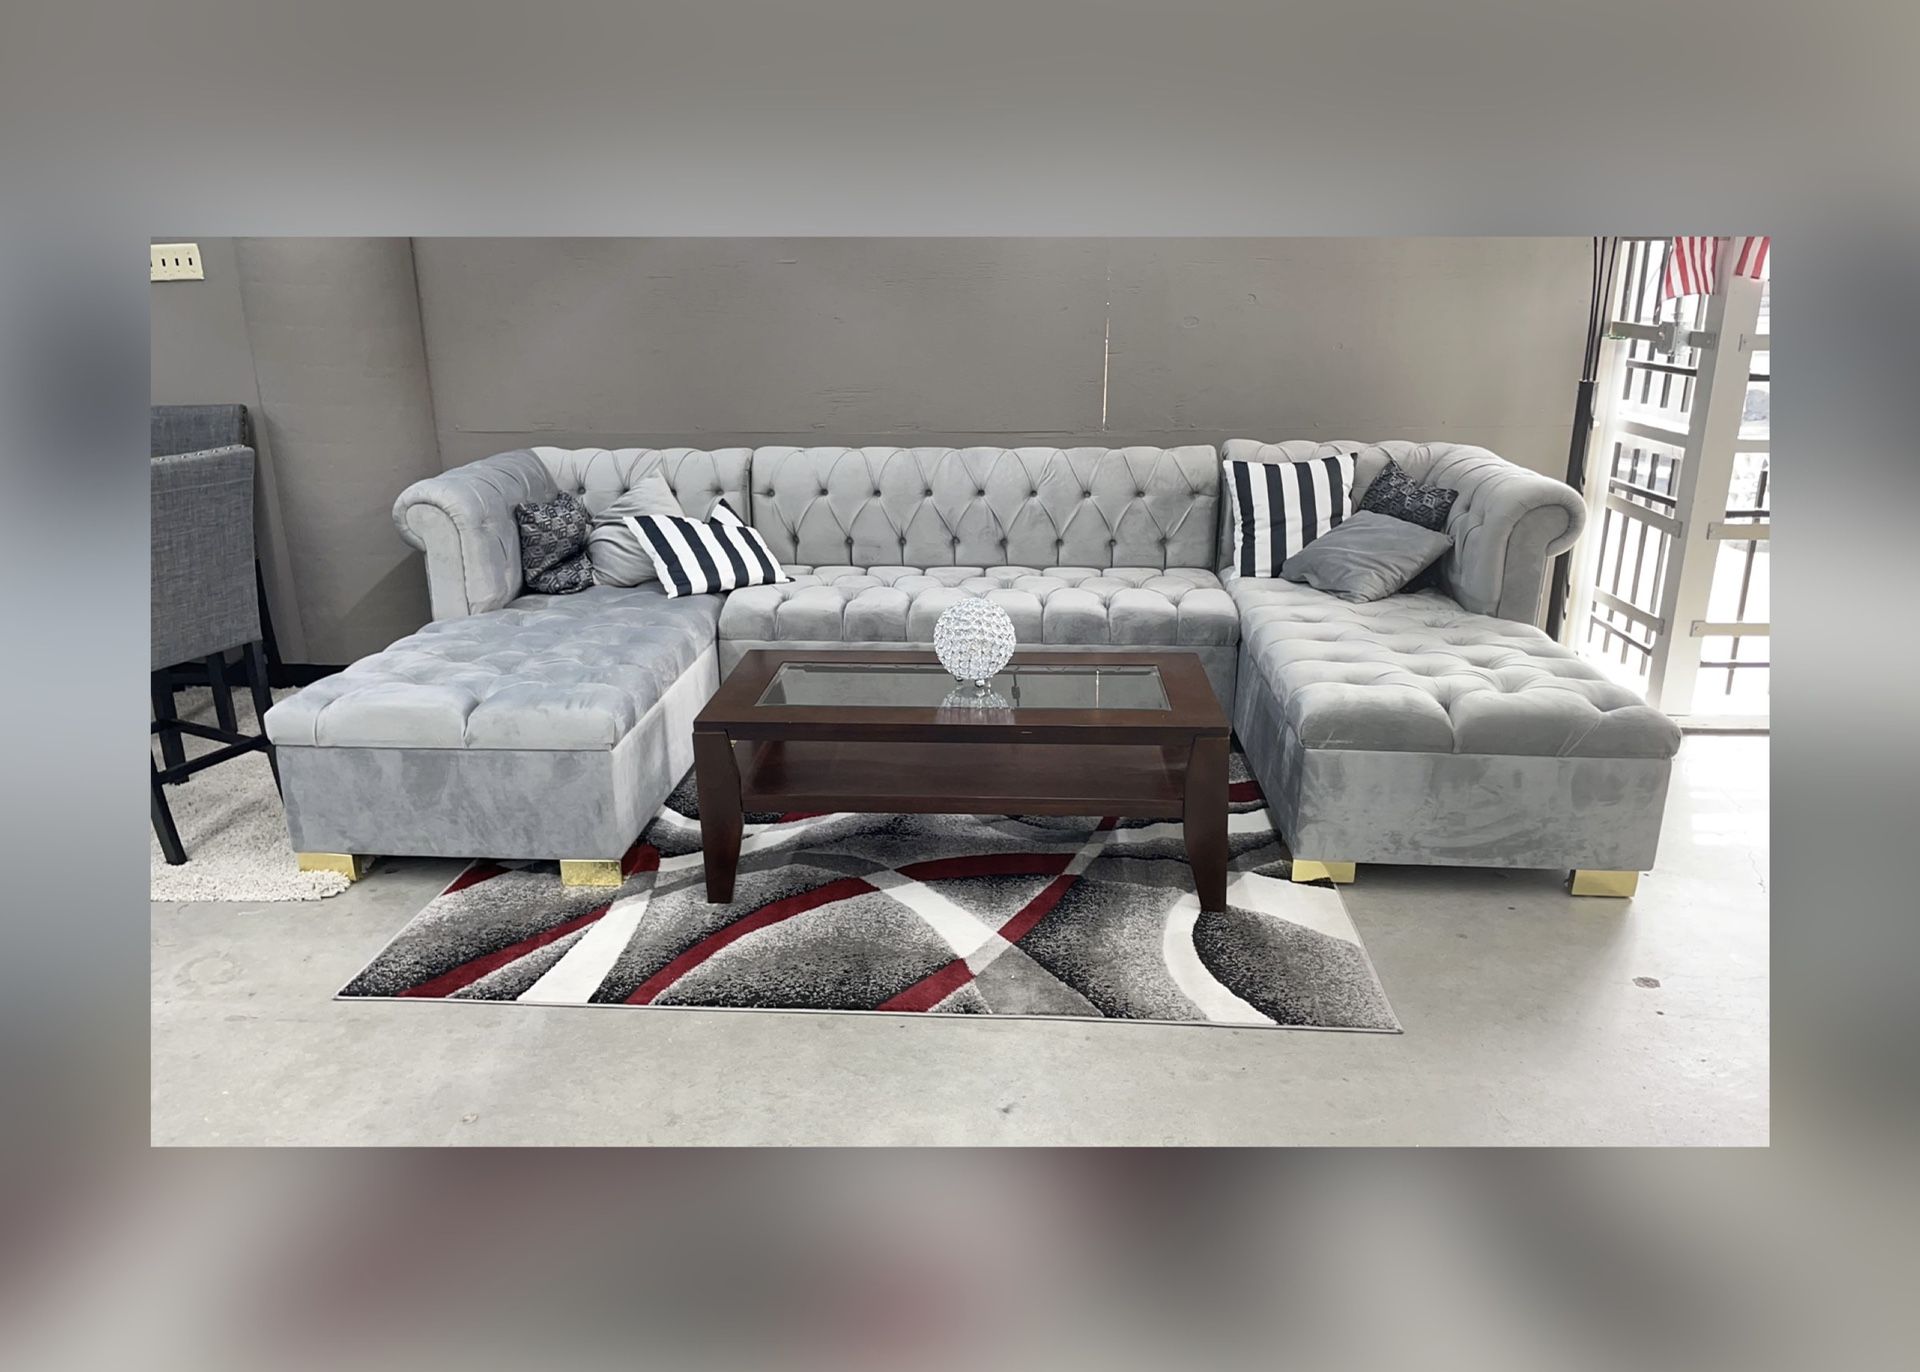 Atlas Grey Oversized👍🏼 Huge double chaise Sectional 😊🙏Delivery option🚚only $39 down🤩